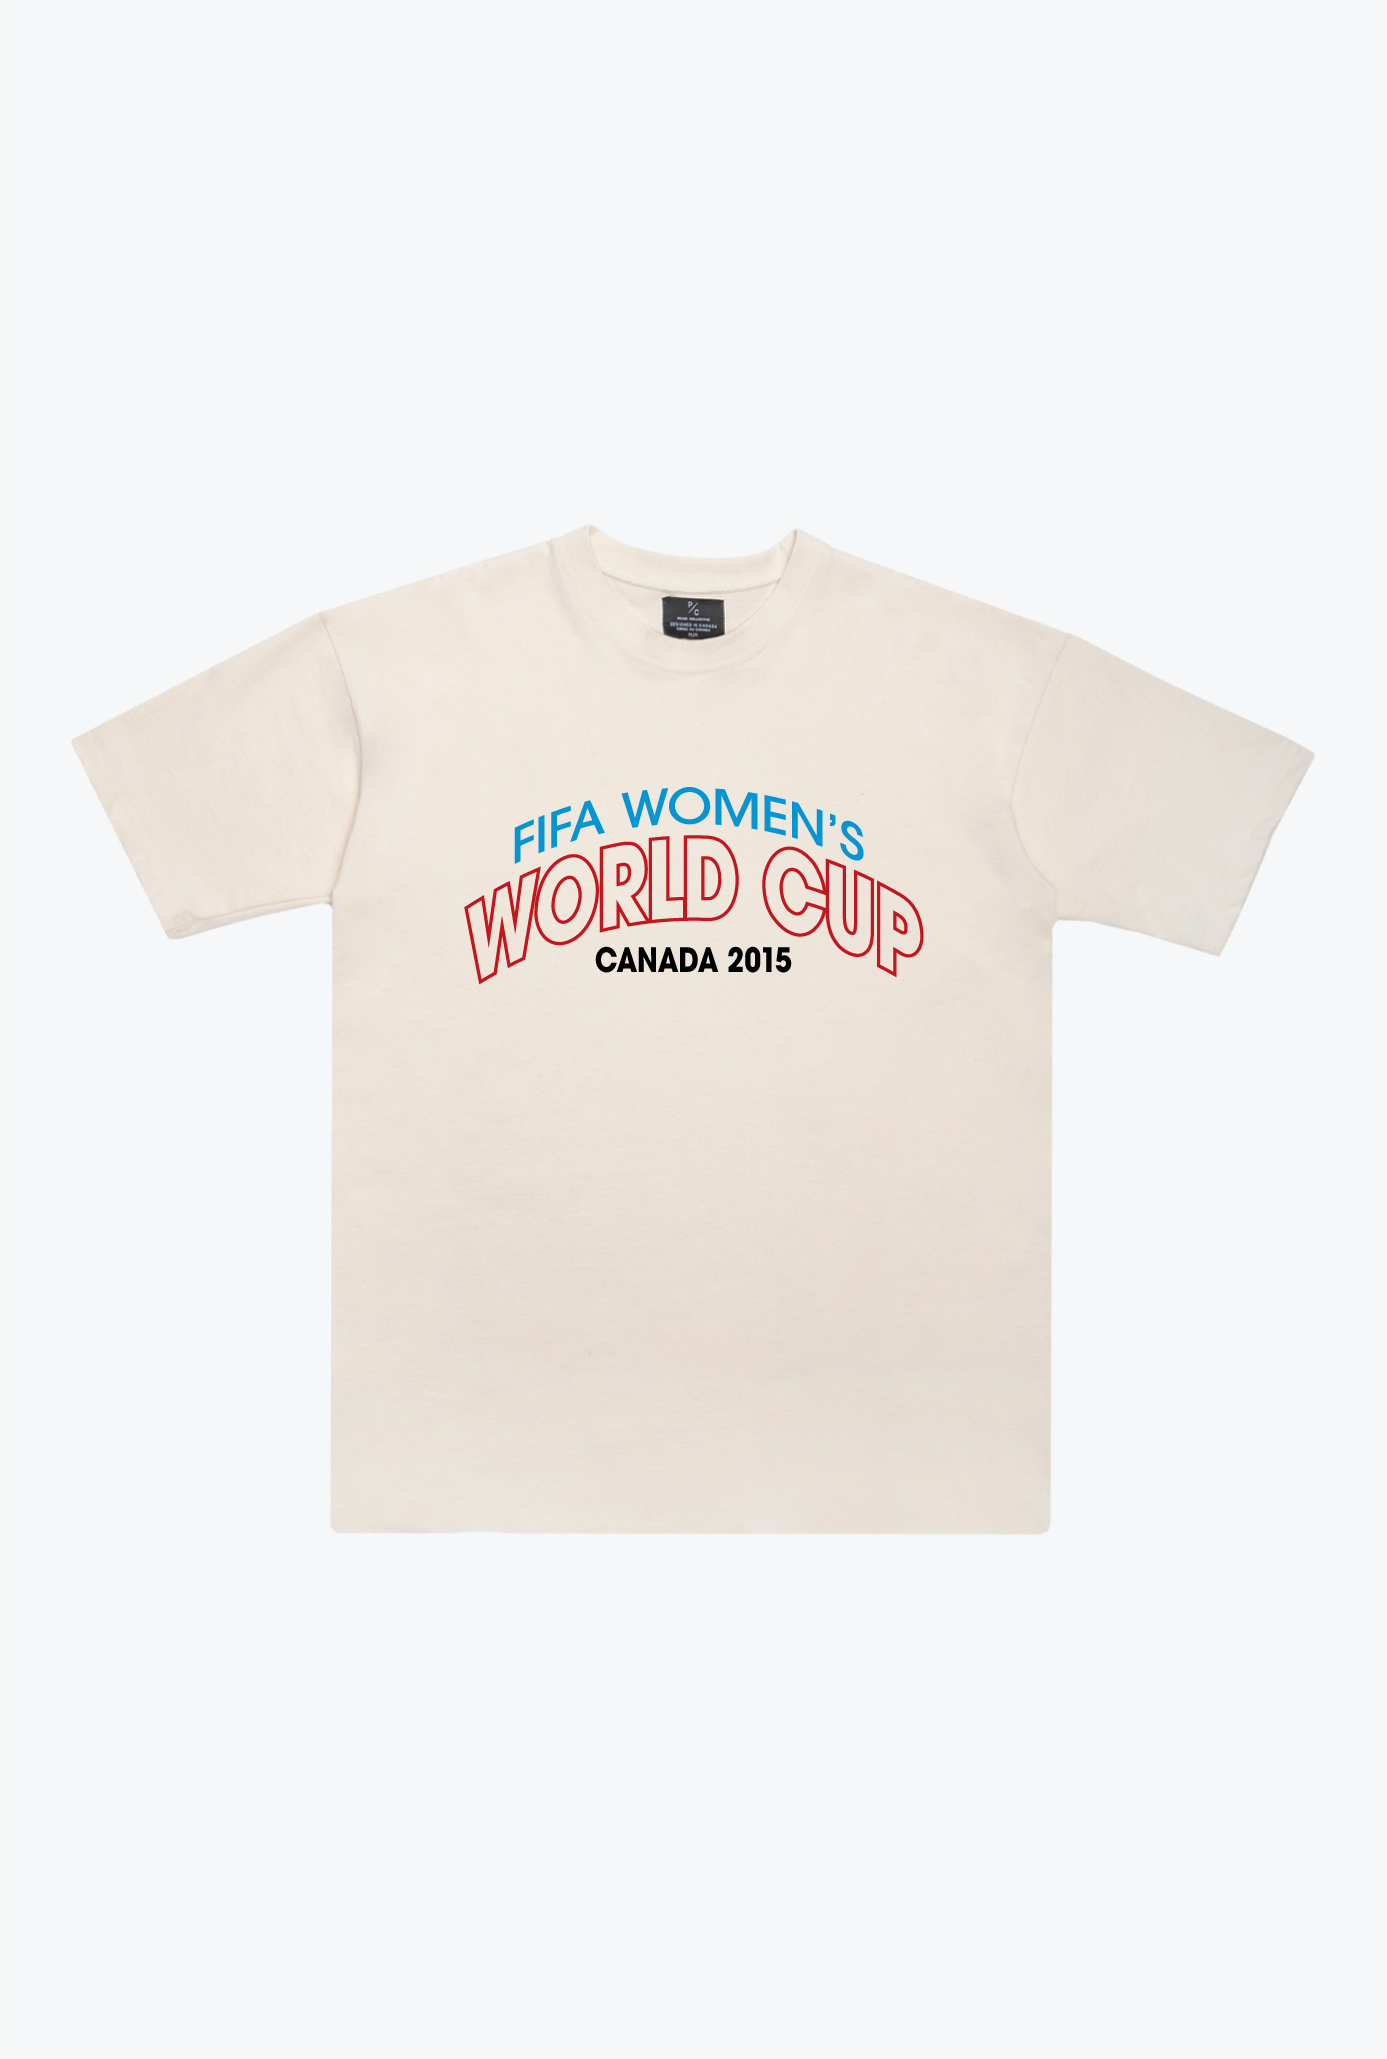 Canada 2015 World Cup Vintage Premium T-Shirt - Ivory